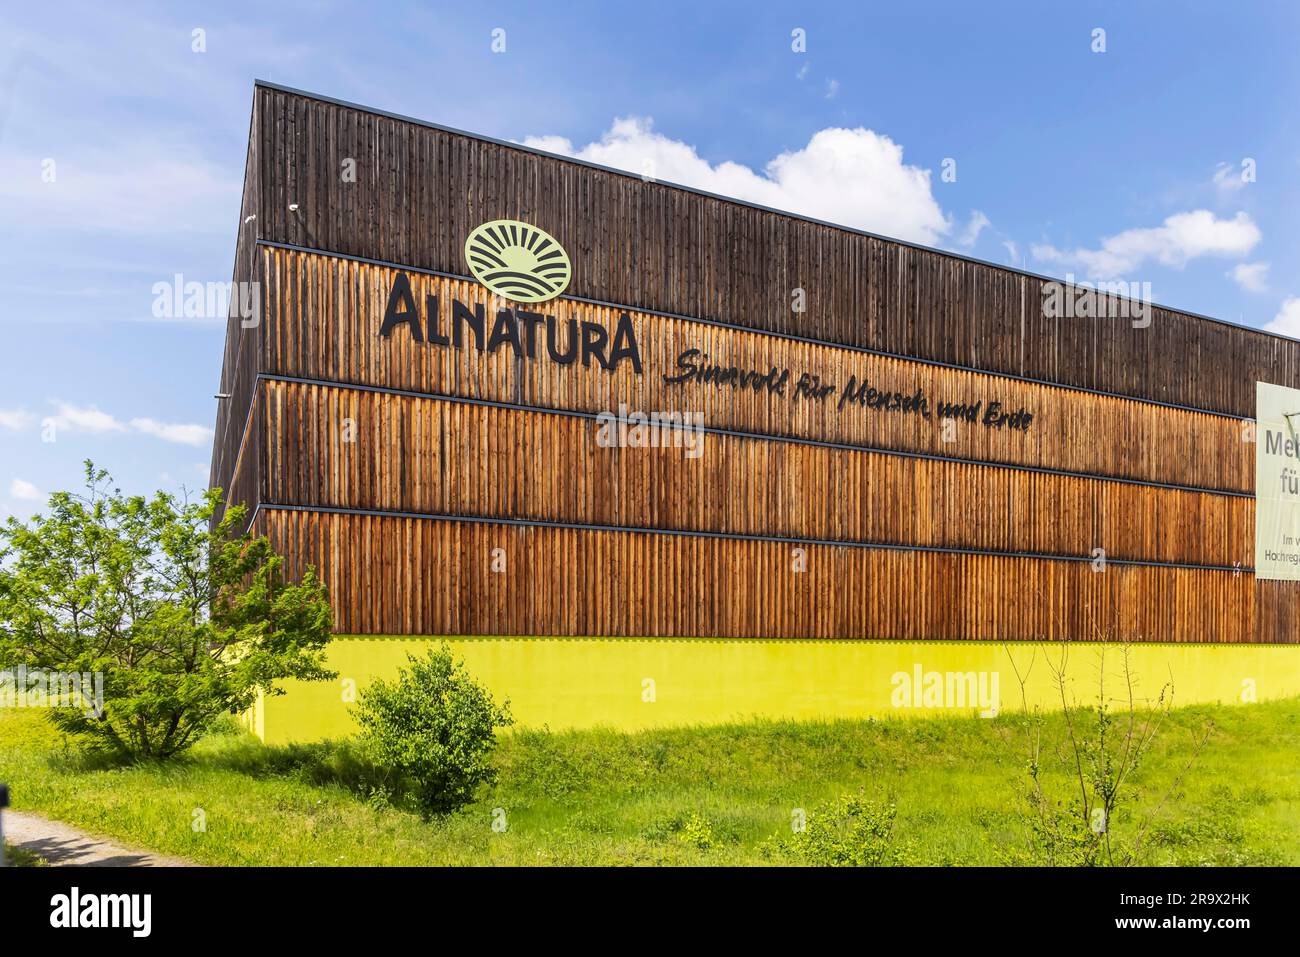 Alnatura distribution centre, logistics centre, the world's largest high-bay warehouse made of wood, architecture in timber construction, Lorsch Stock Photo